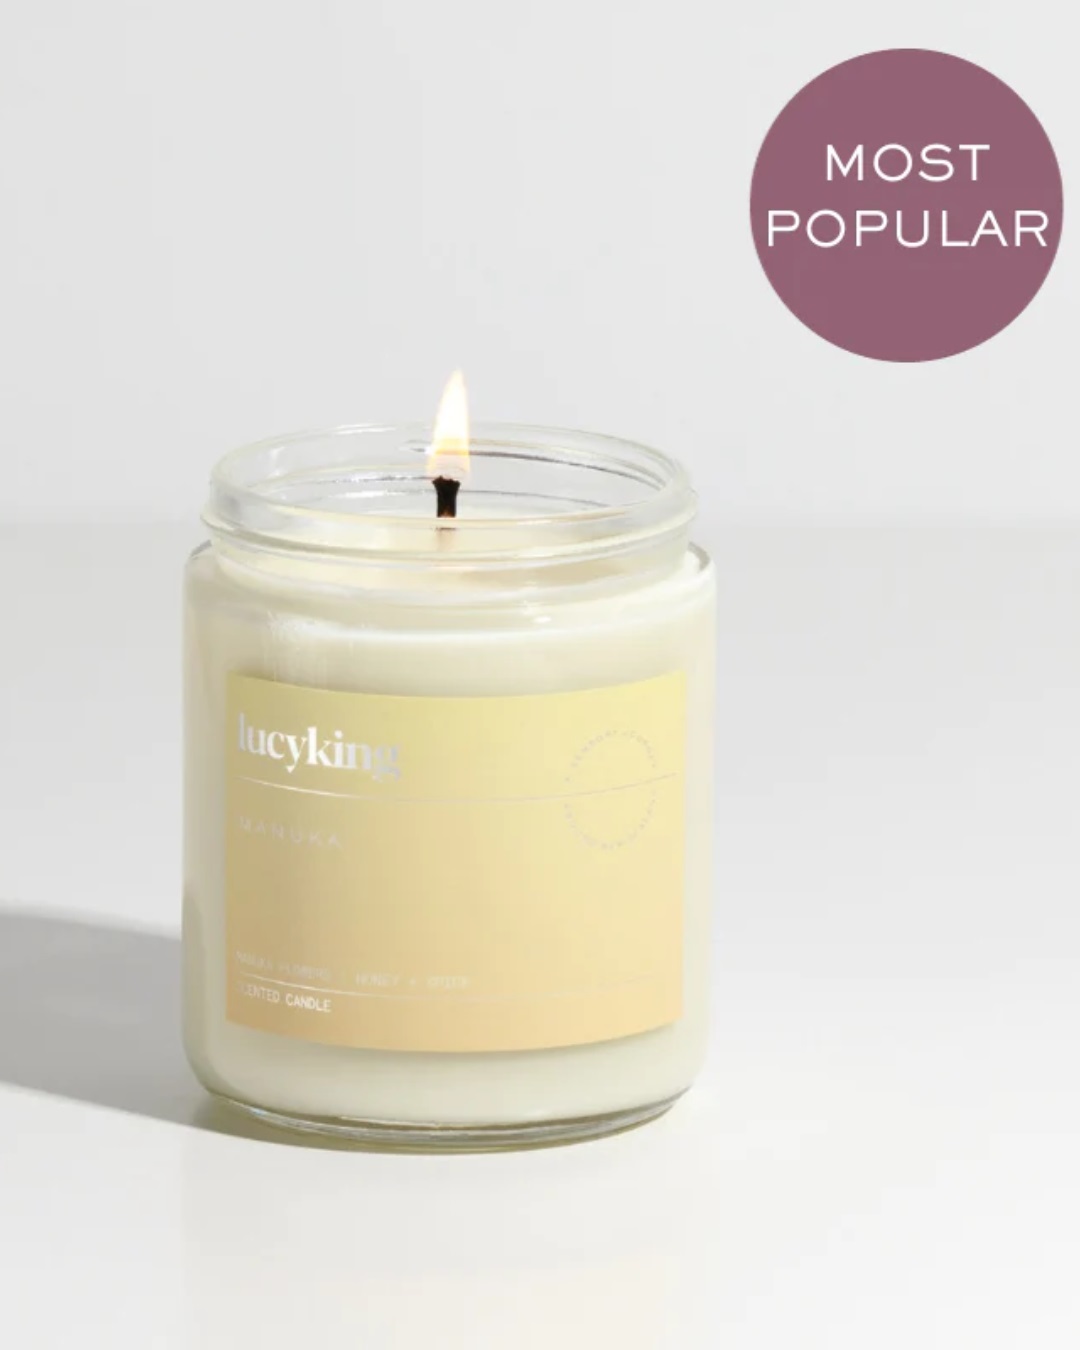 Glass jar candle with yellow label